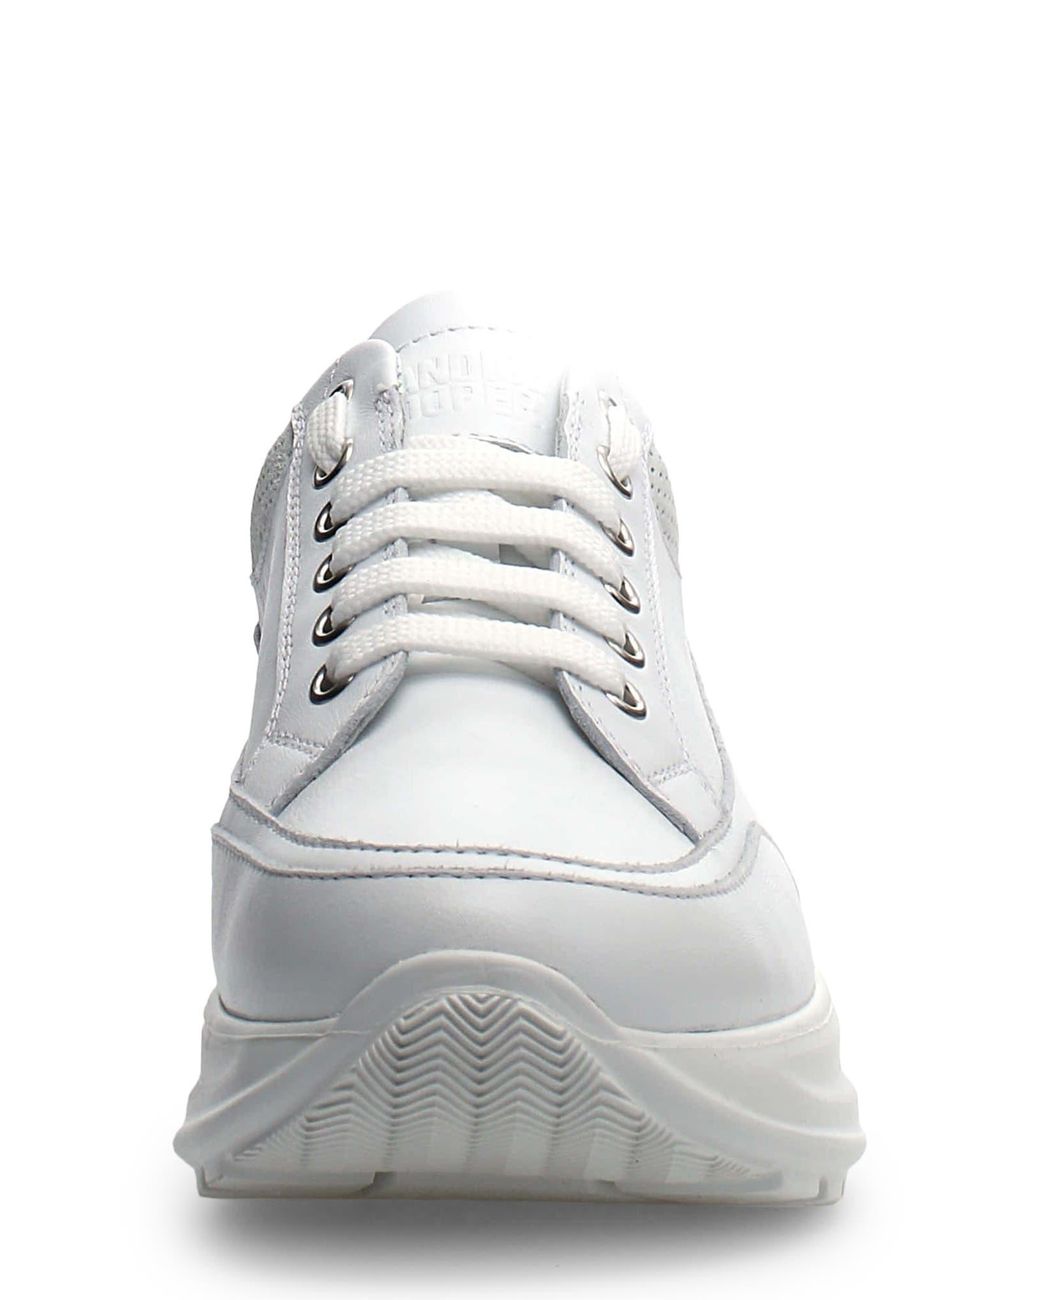 Candice Cooper Spark Two Platform Sneaker in Gray | Lyst